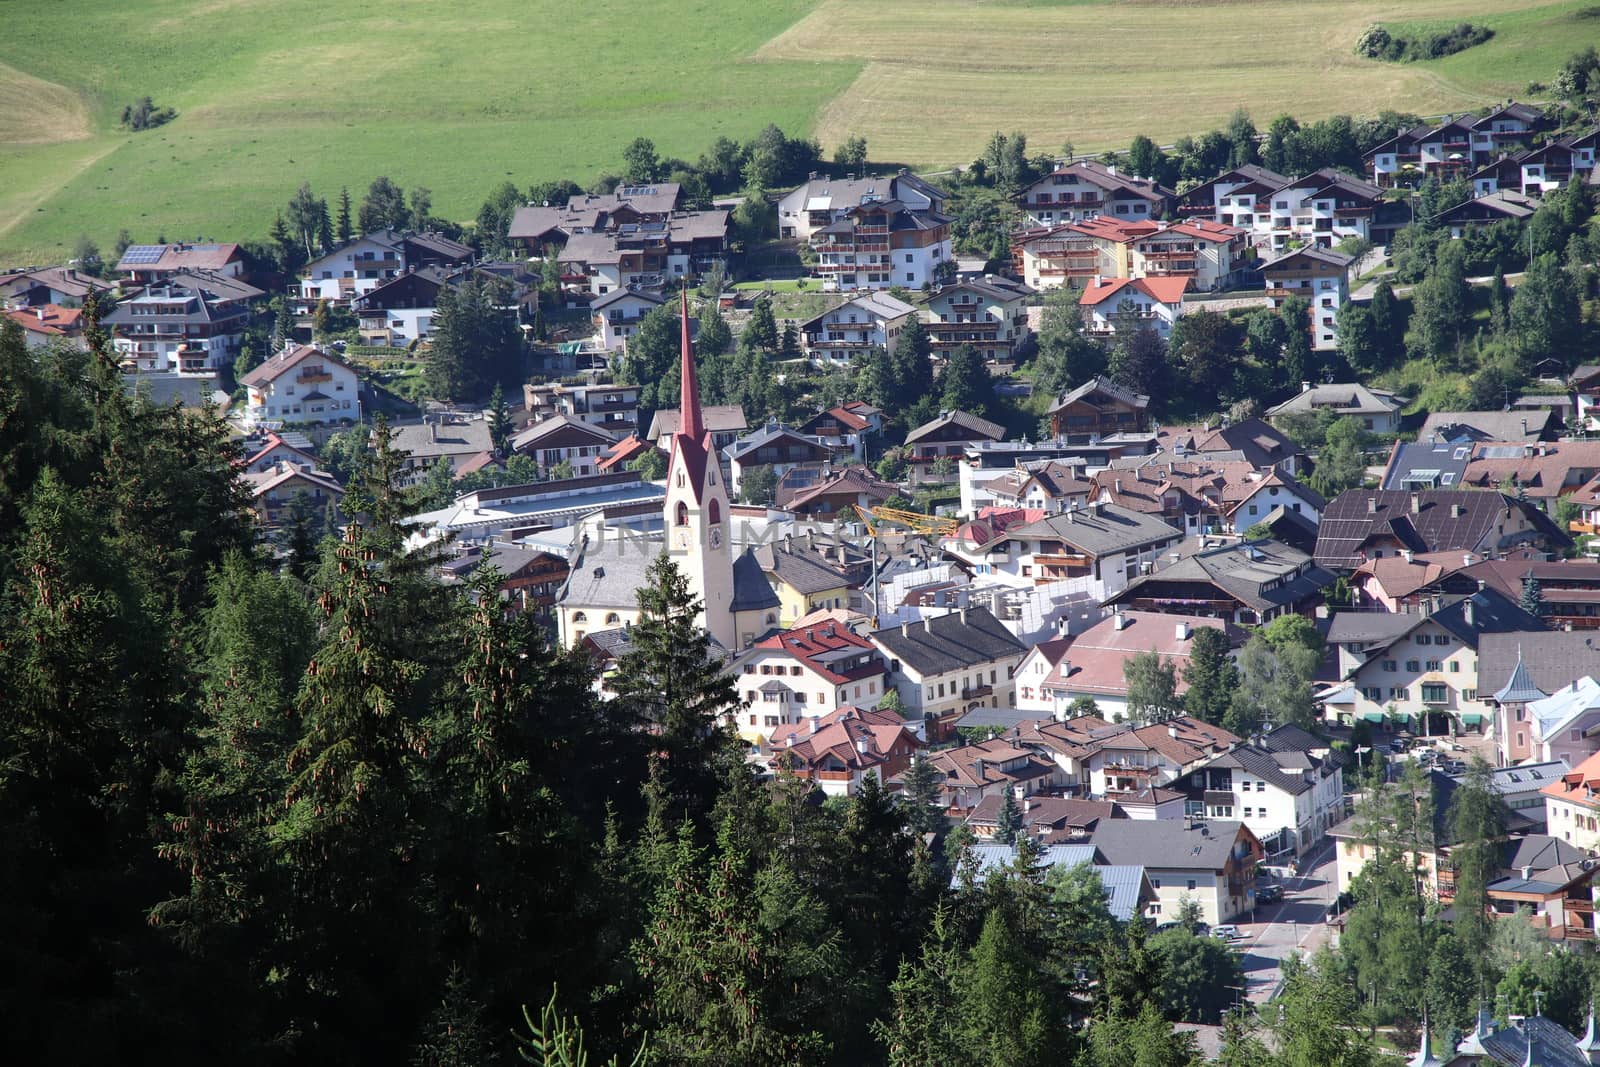 Aerial view of valley and small city